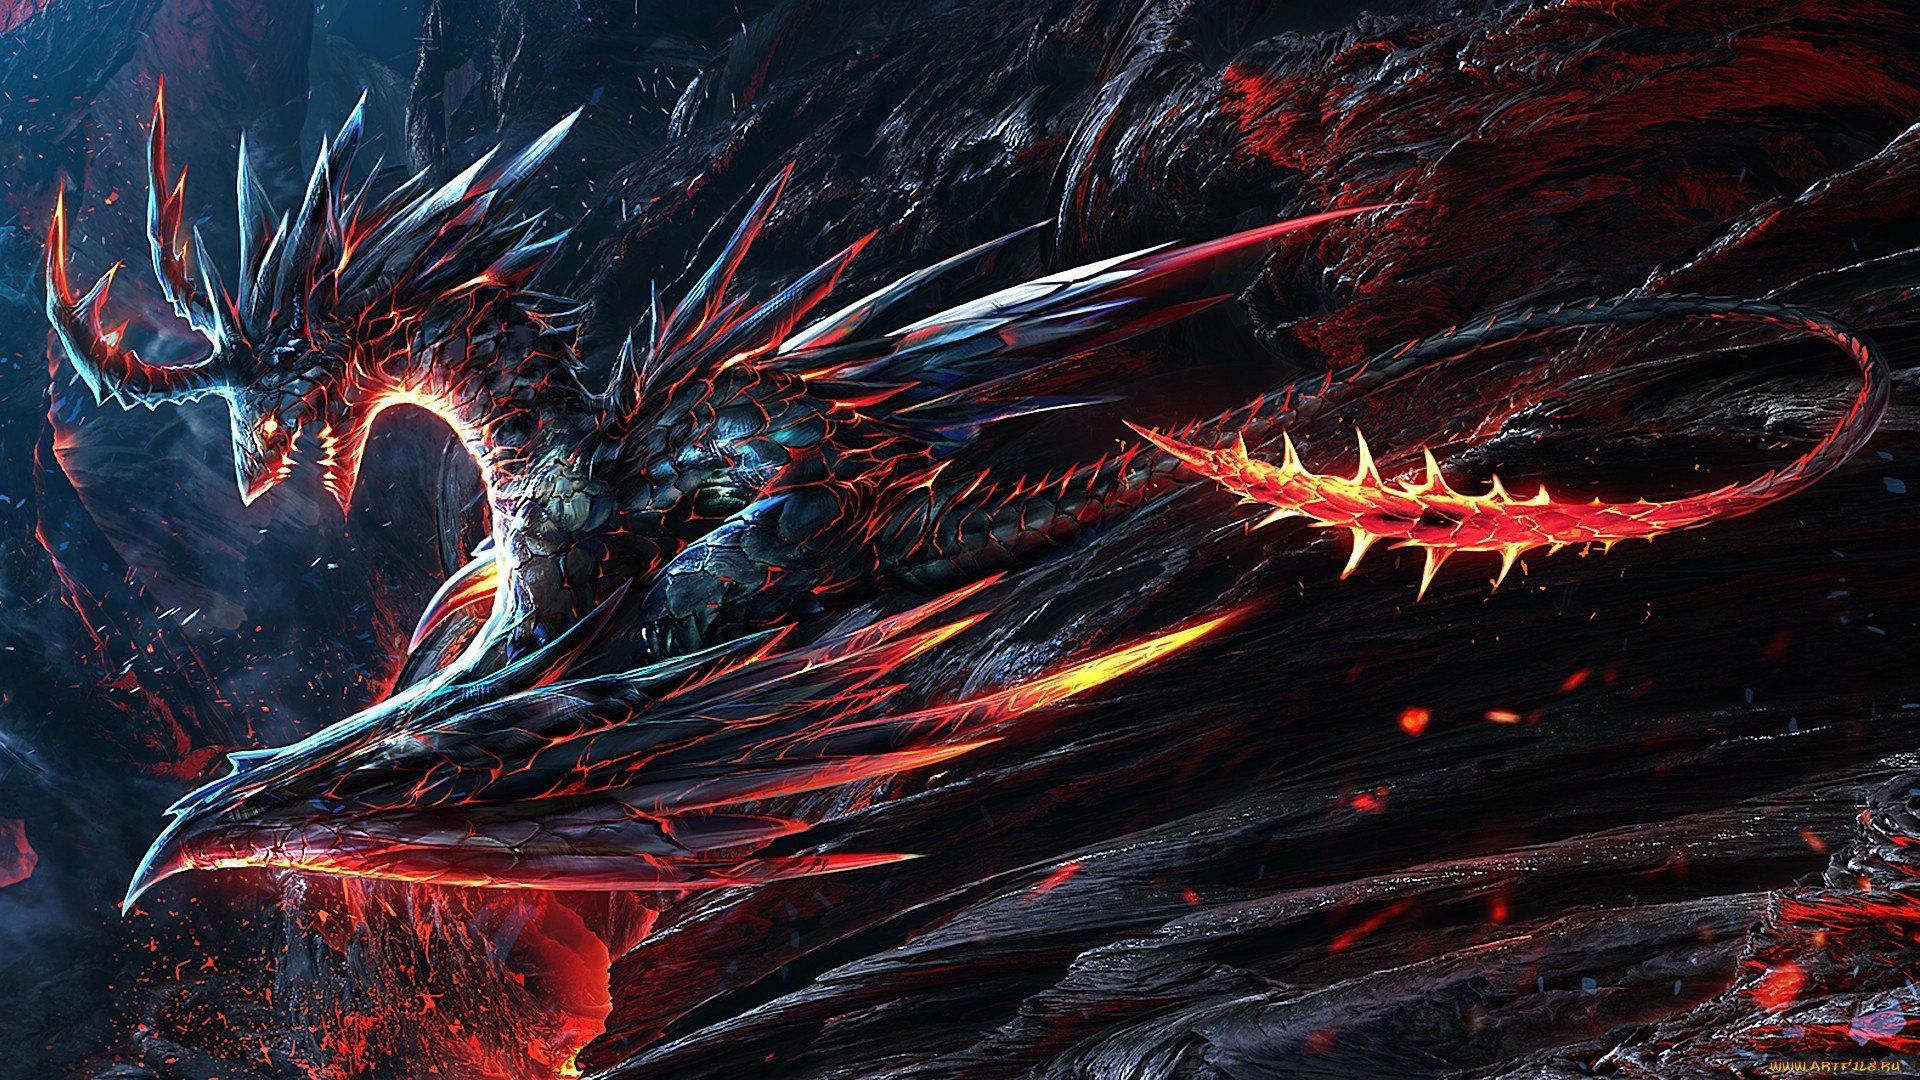 Gallery for - awesome dragon wallpapers